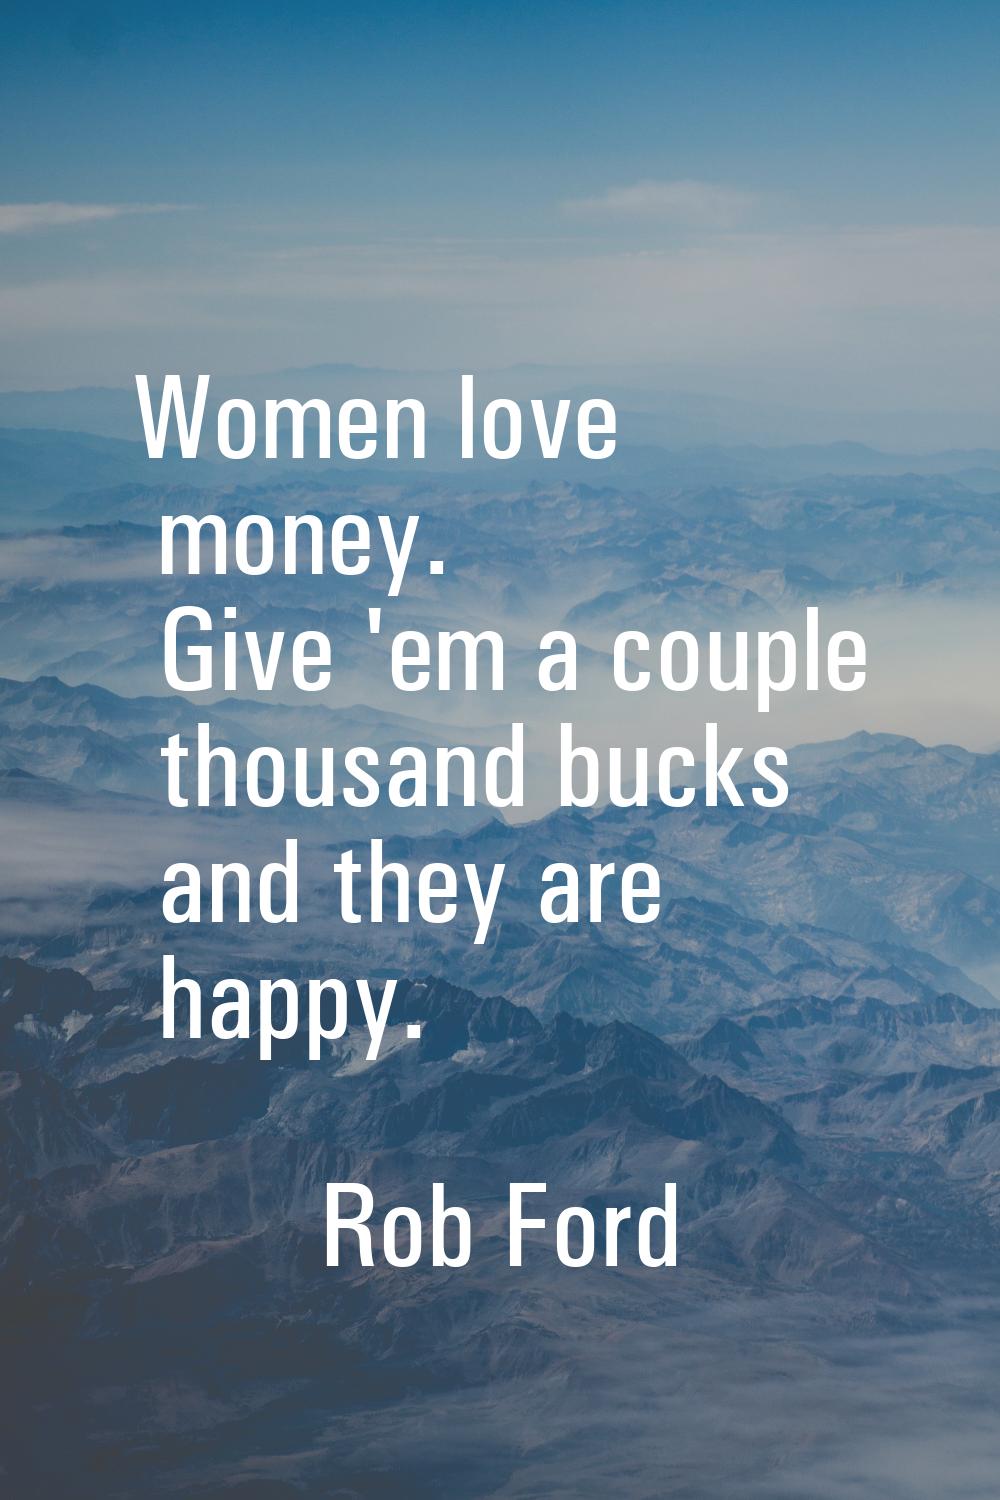 Women love money. Give 'em a couple thousand bucks and they are happy.